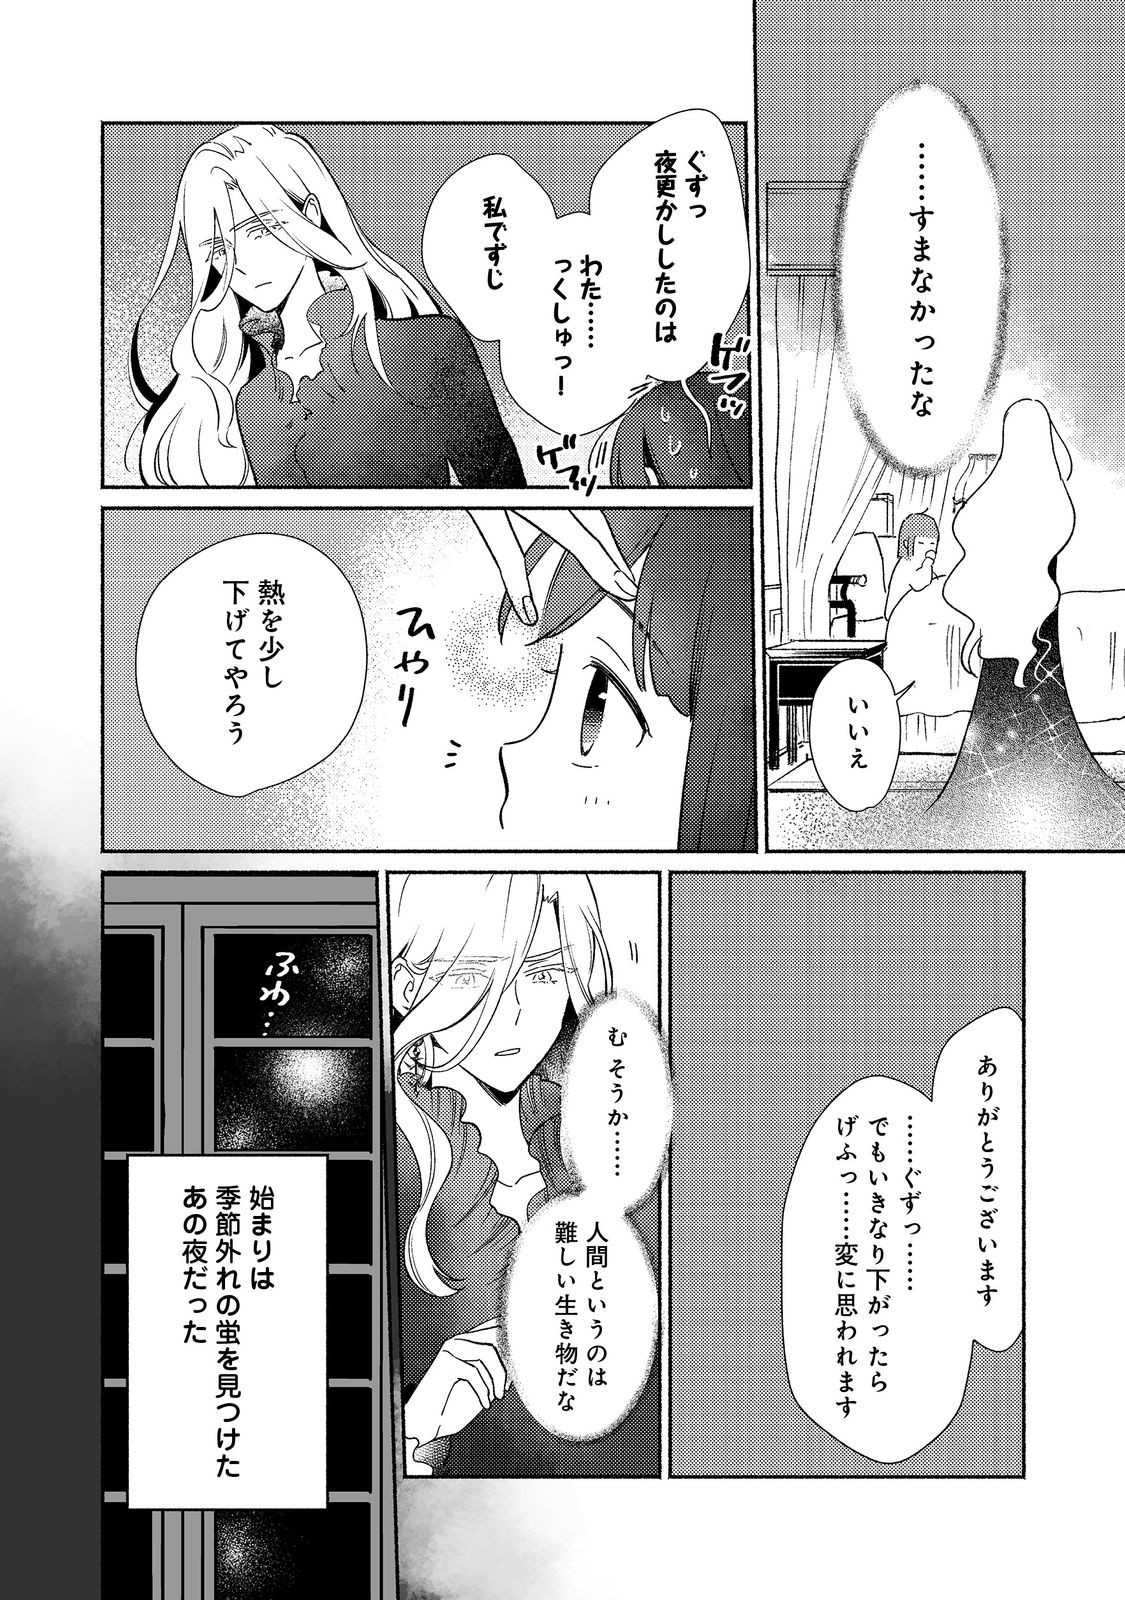 I’m the White Pig Nobleman 第22.1話 - Page 2